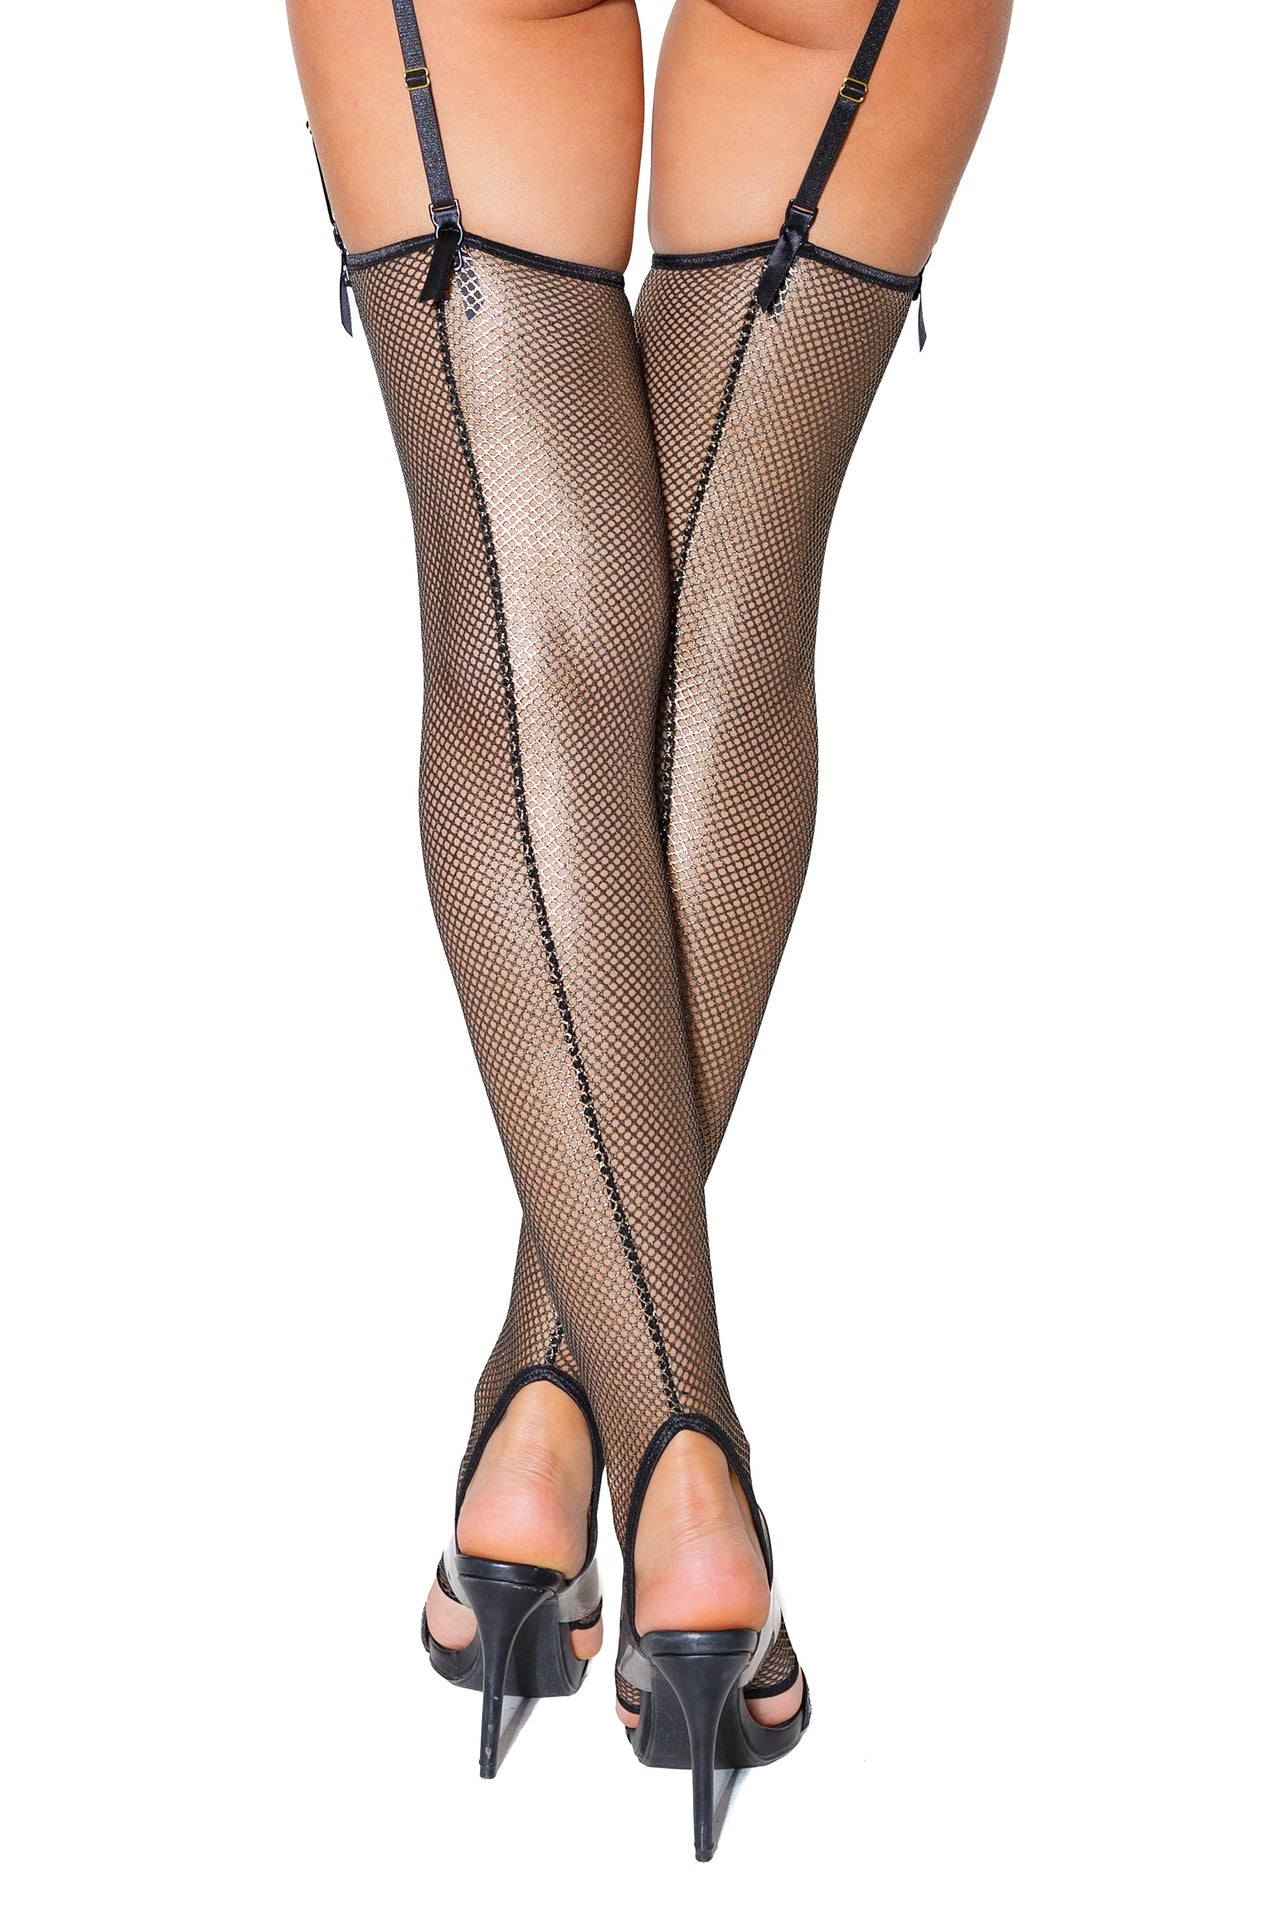 Coquette - 23309 - Toeless Stockings - Gold - Stag Shop